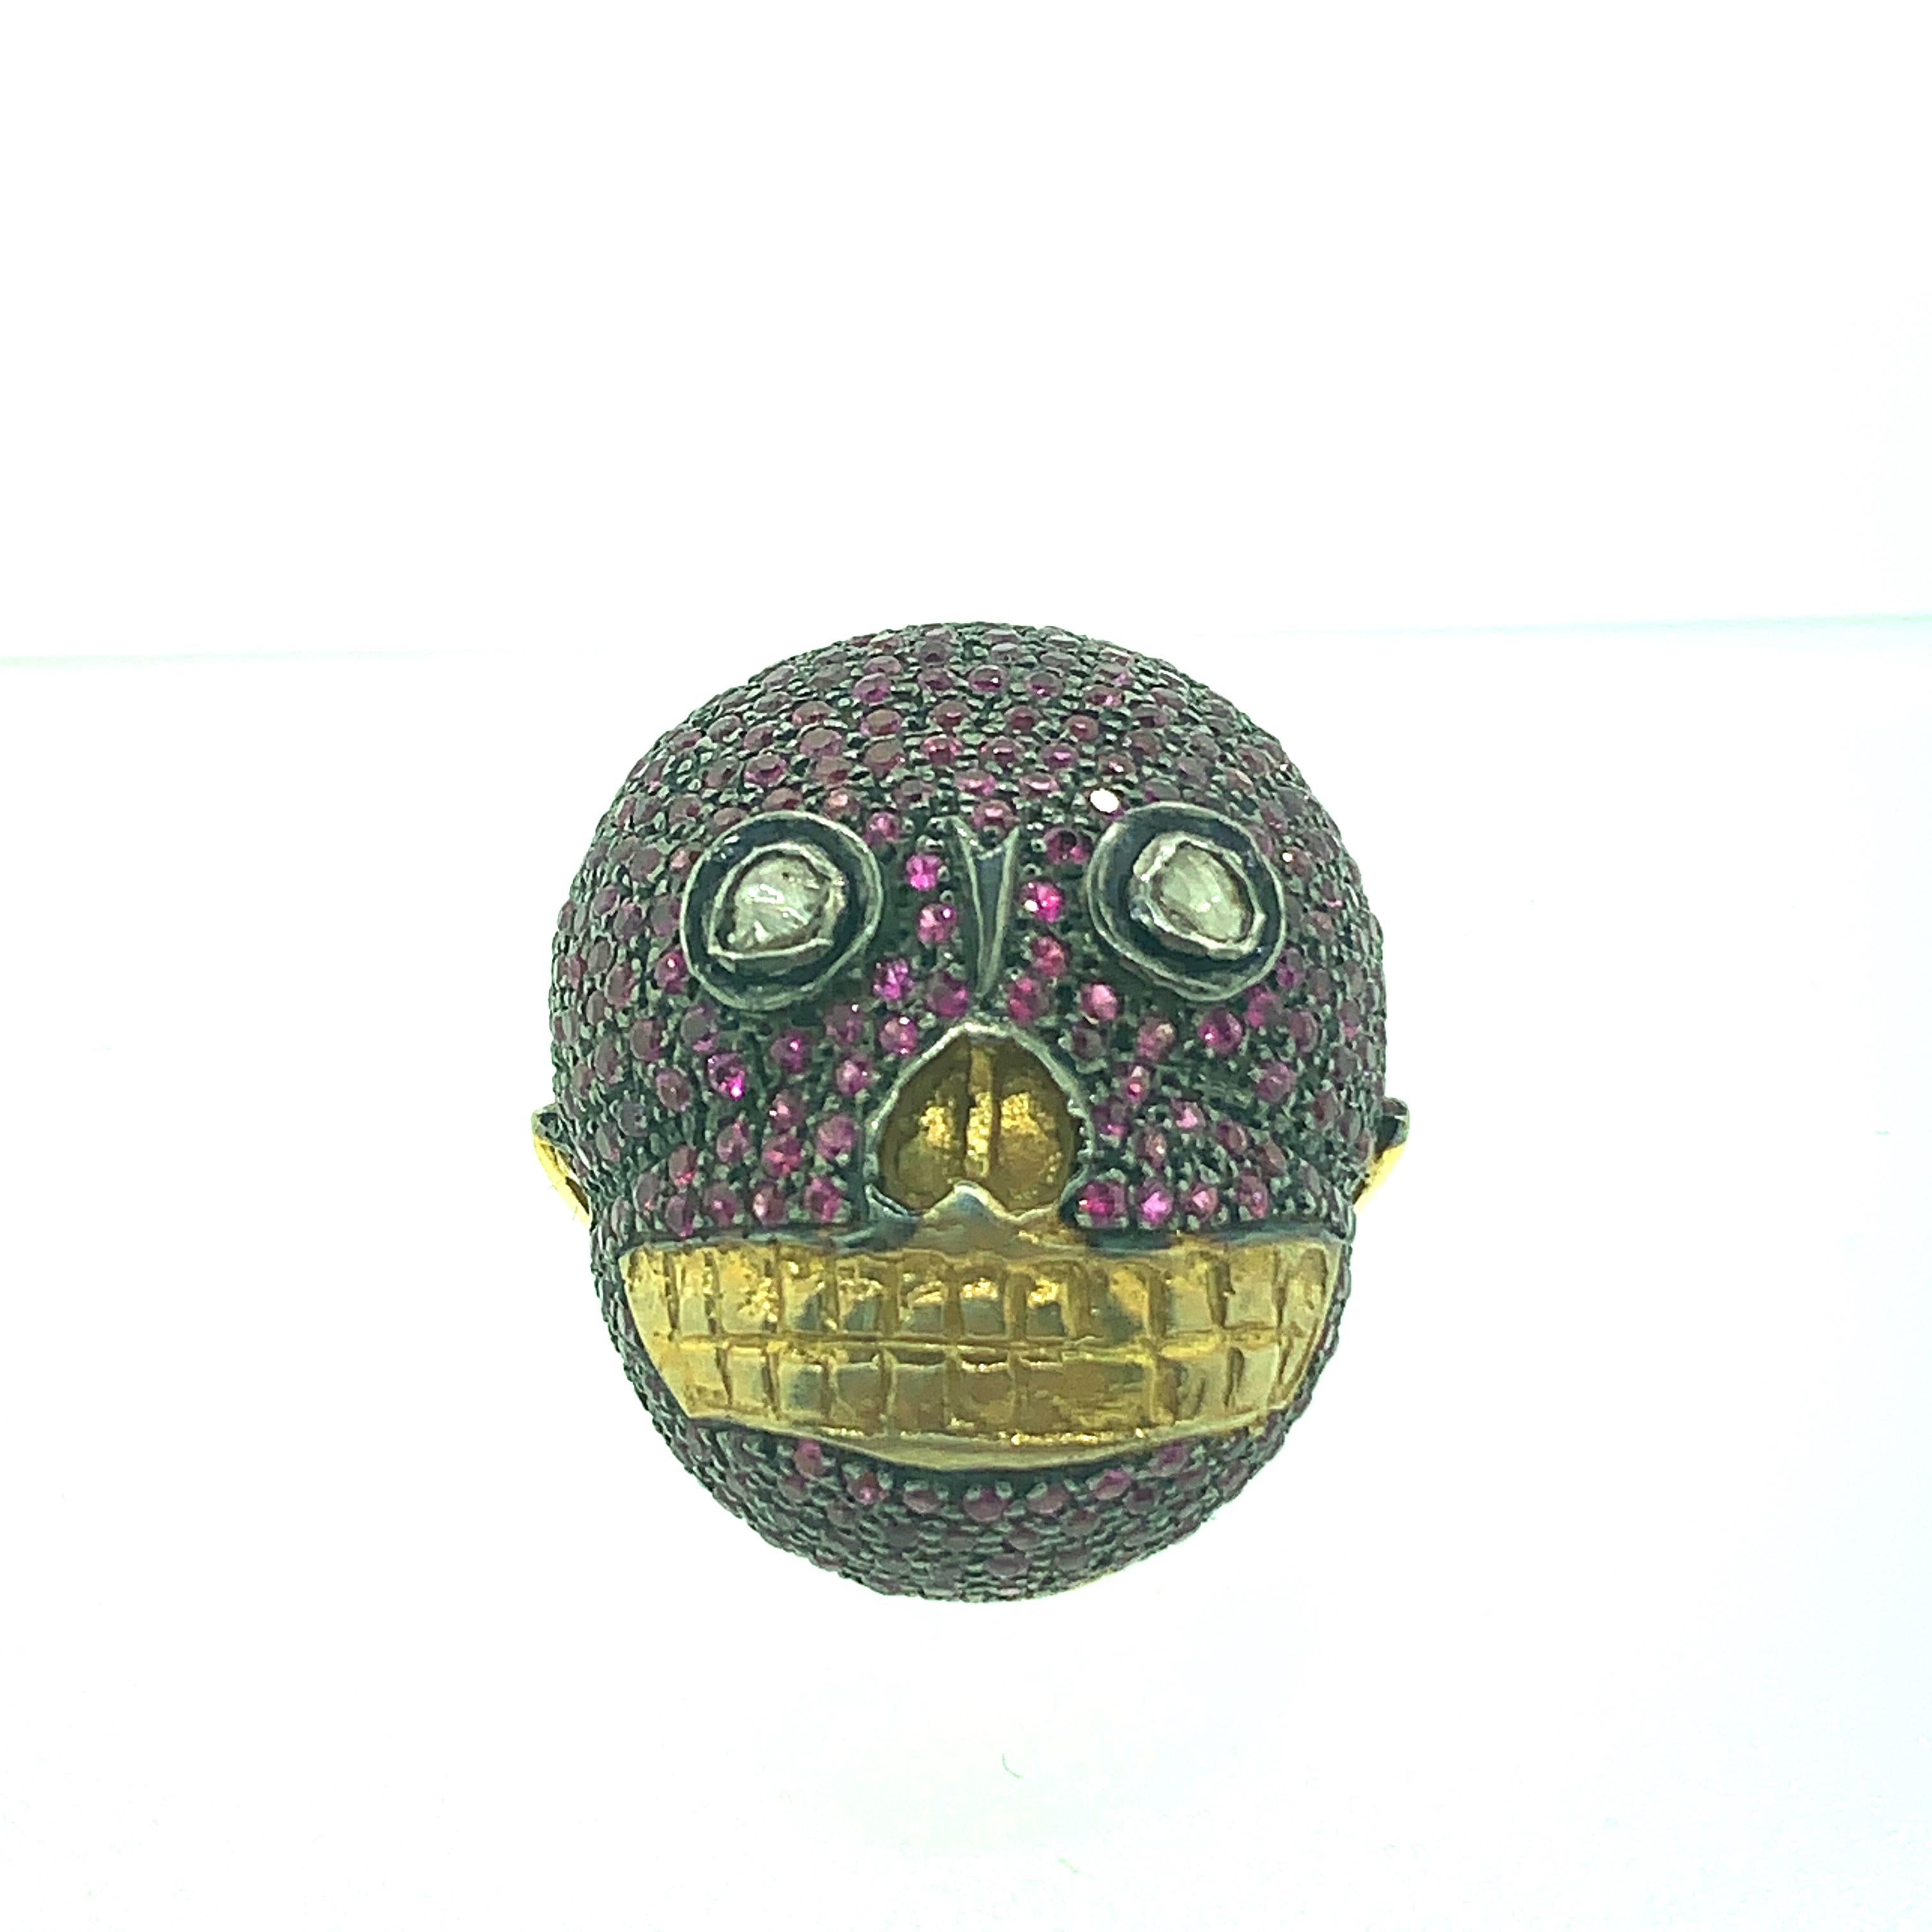 2.30ct Ruby , 0.09ct Diamonds Skull Ring in Oxidized Sterling Silver , 14K Gold. The shank is made of 14K Gold. The face is sterling silver with Rubies set all over and the teeth and nose are 14K Gold. The eyes are Old mine cut diamonds.
Stones :